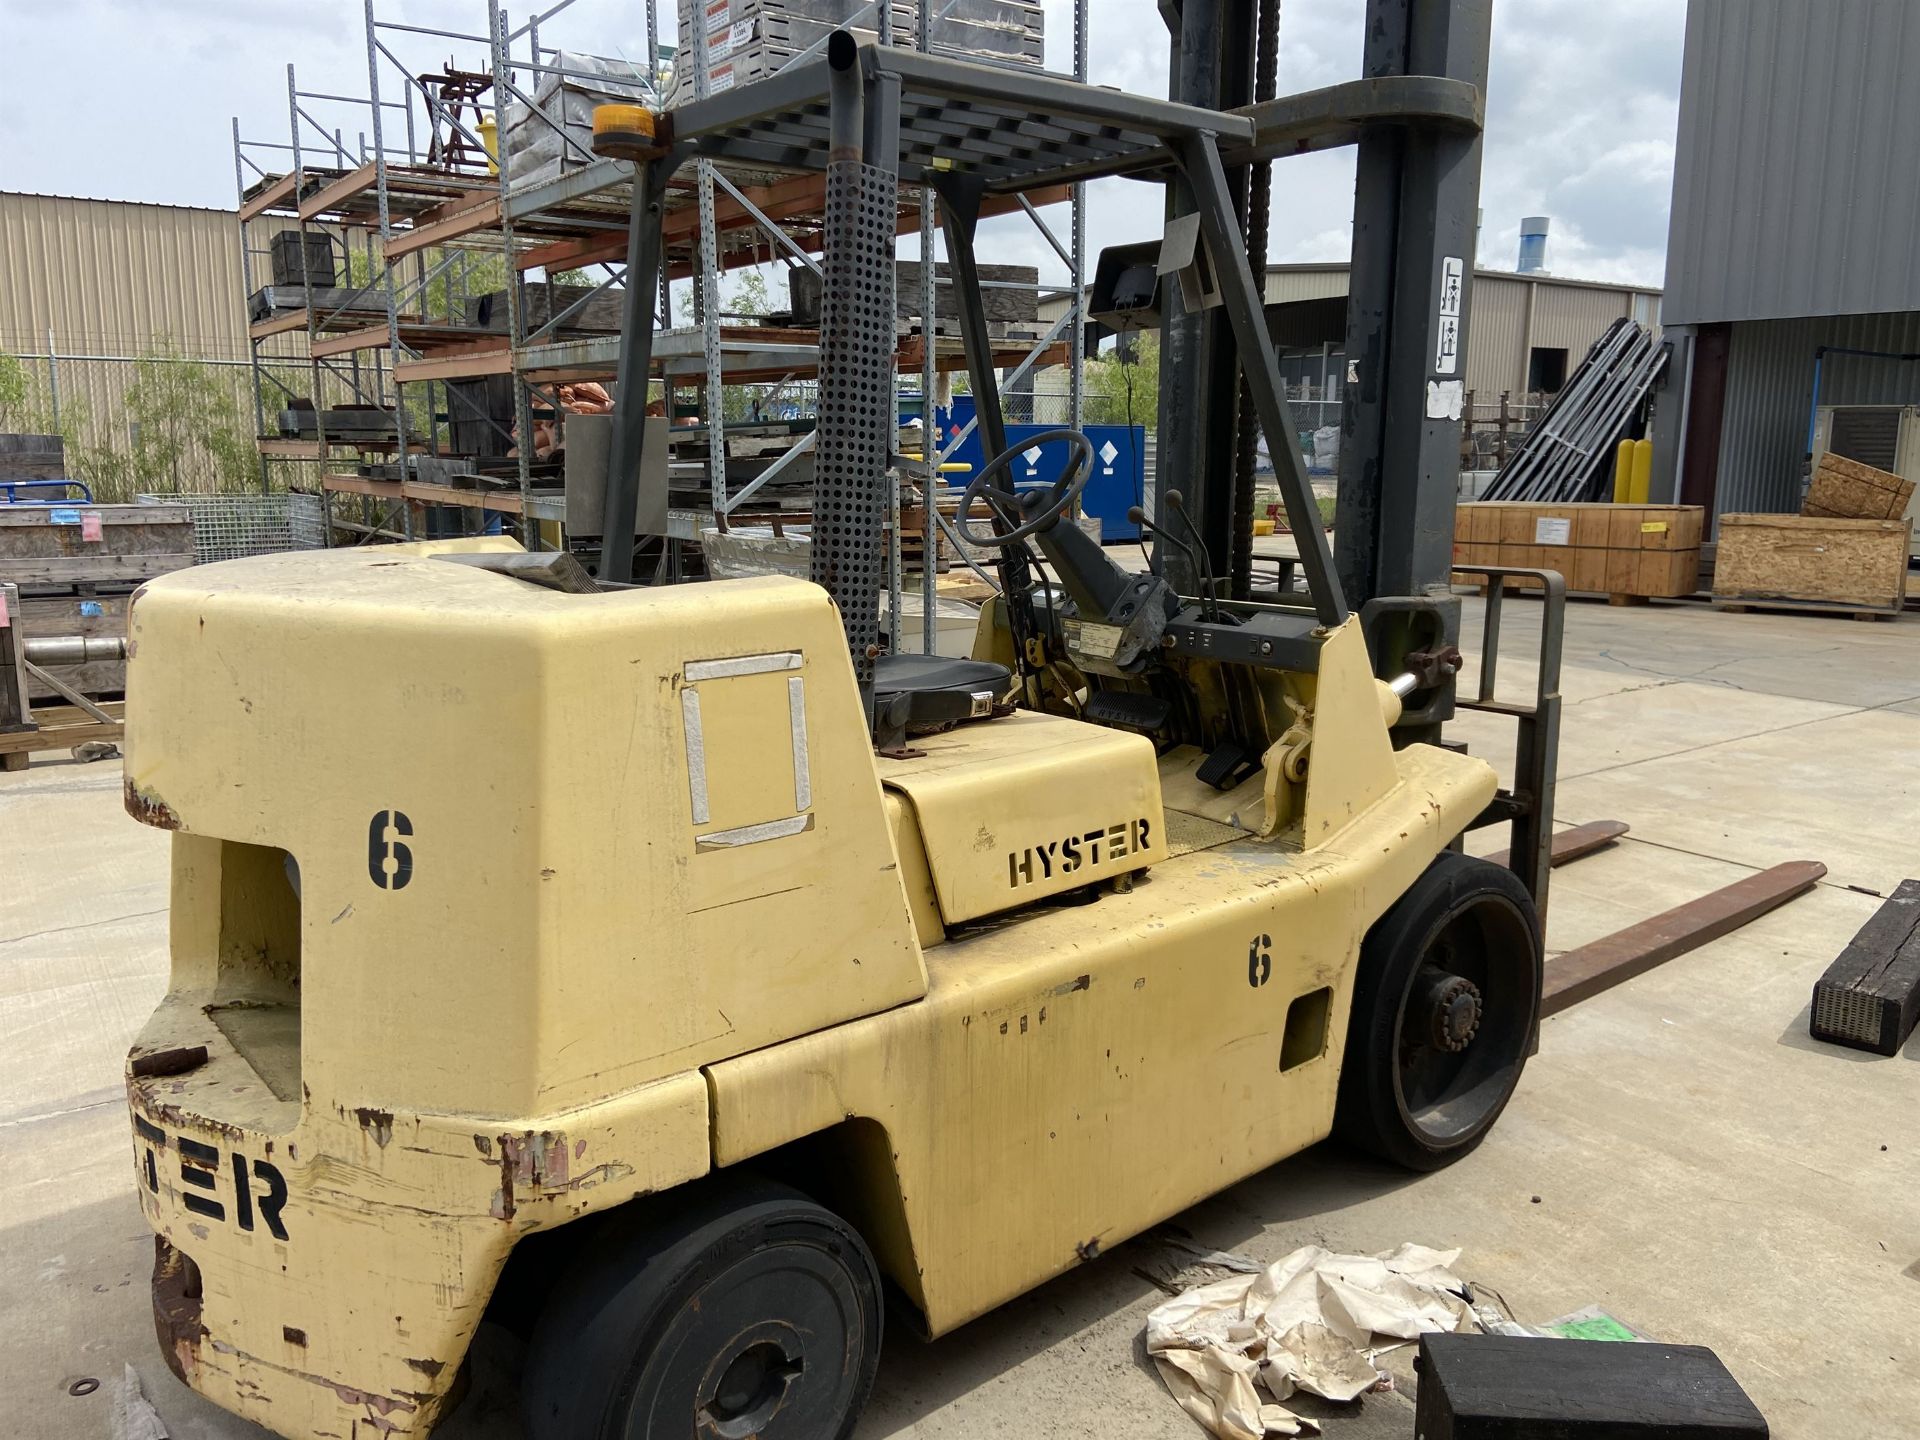 HYSTER S155XL2 Diesel Forklift, s/n B024D06424X, 14,700 lb Capacity, 173" Lift Height, Hard Tires (L - Image 7 of 8